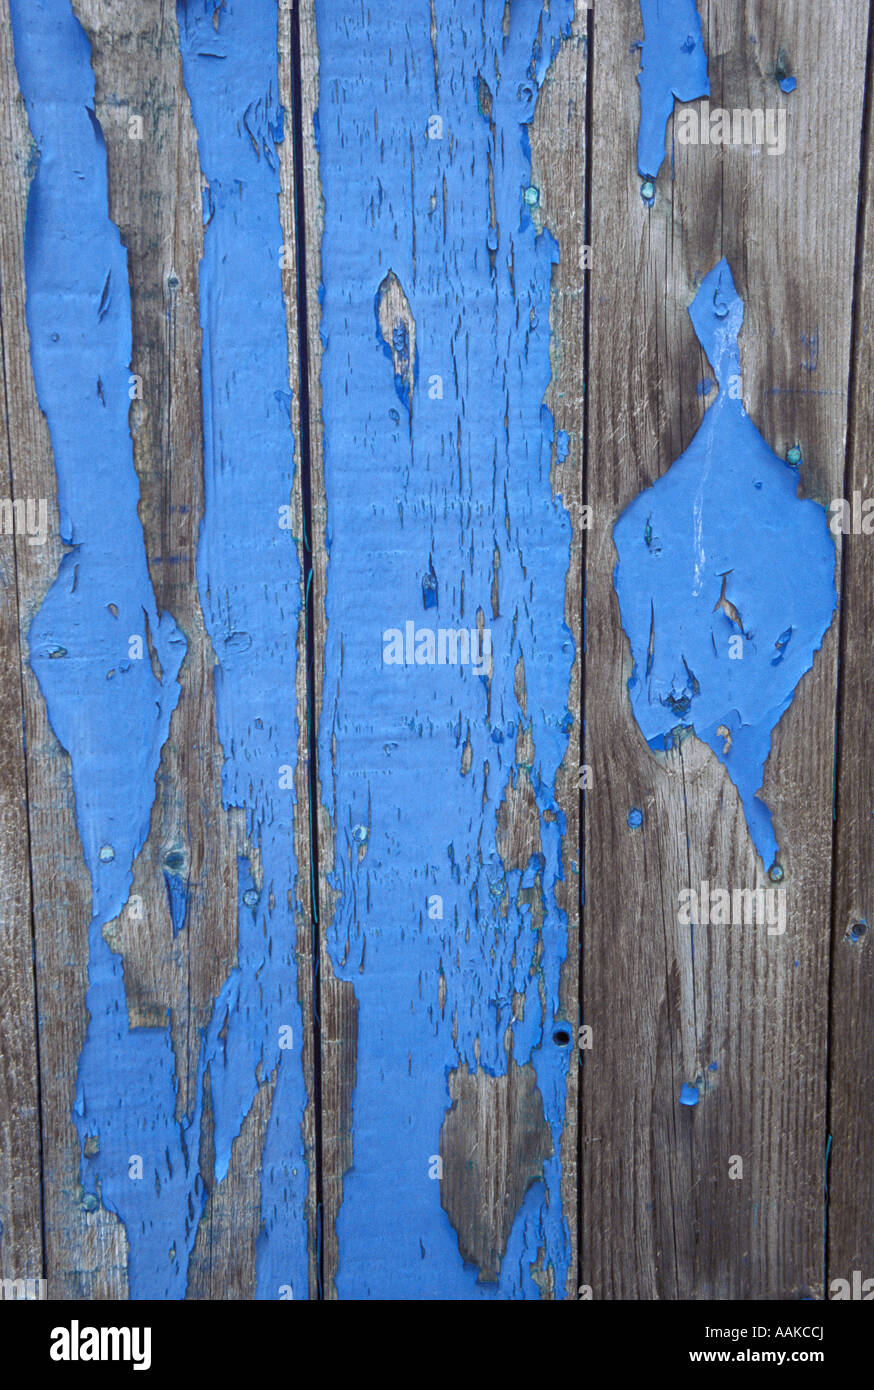 Old Blue Paint Peeling Off Wall Stock Photo 12651665 Alamy